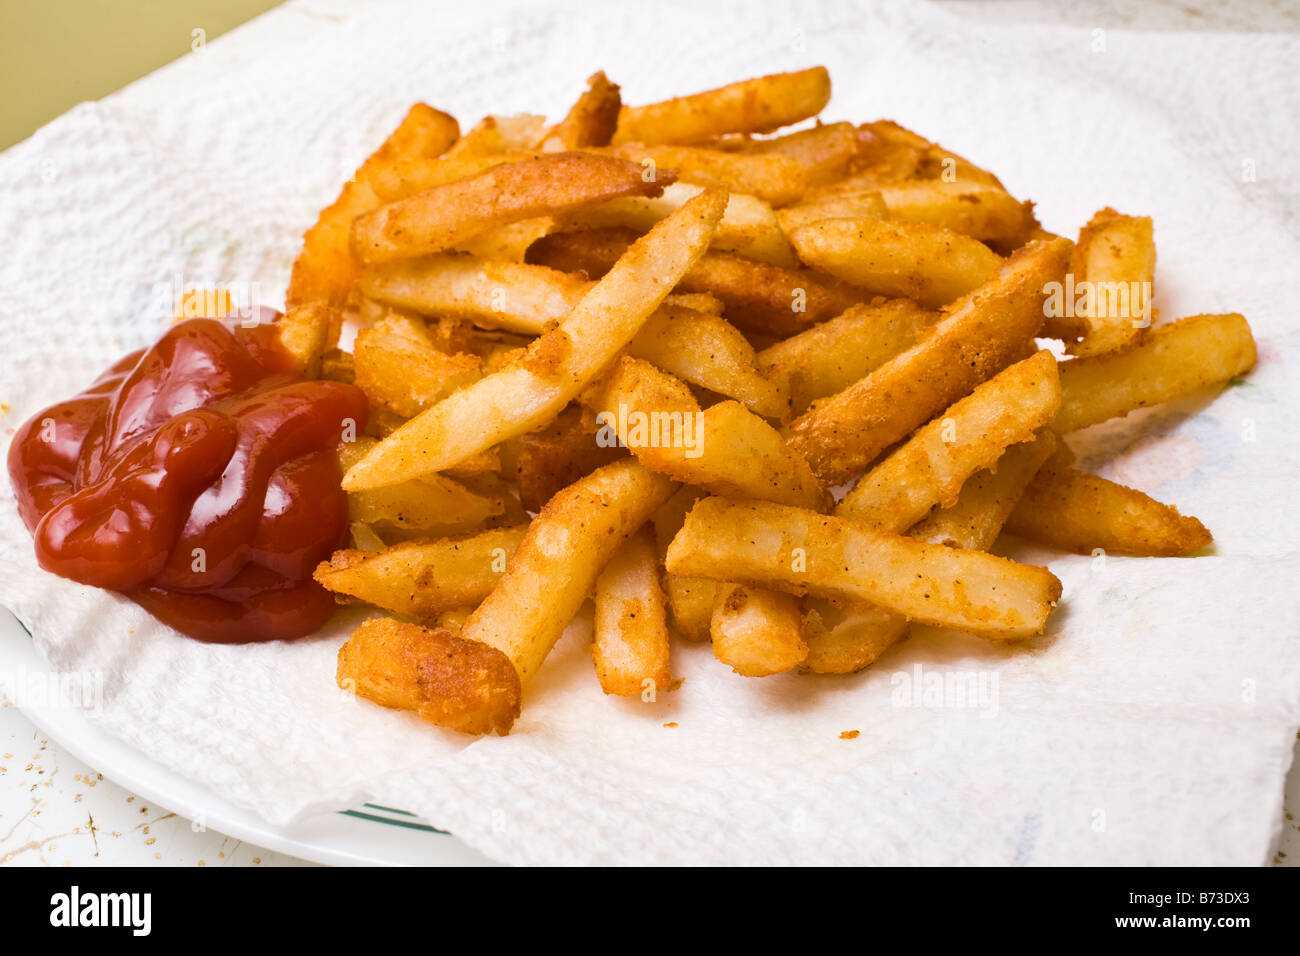 Hot french fries and ketchup Stock Photo